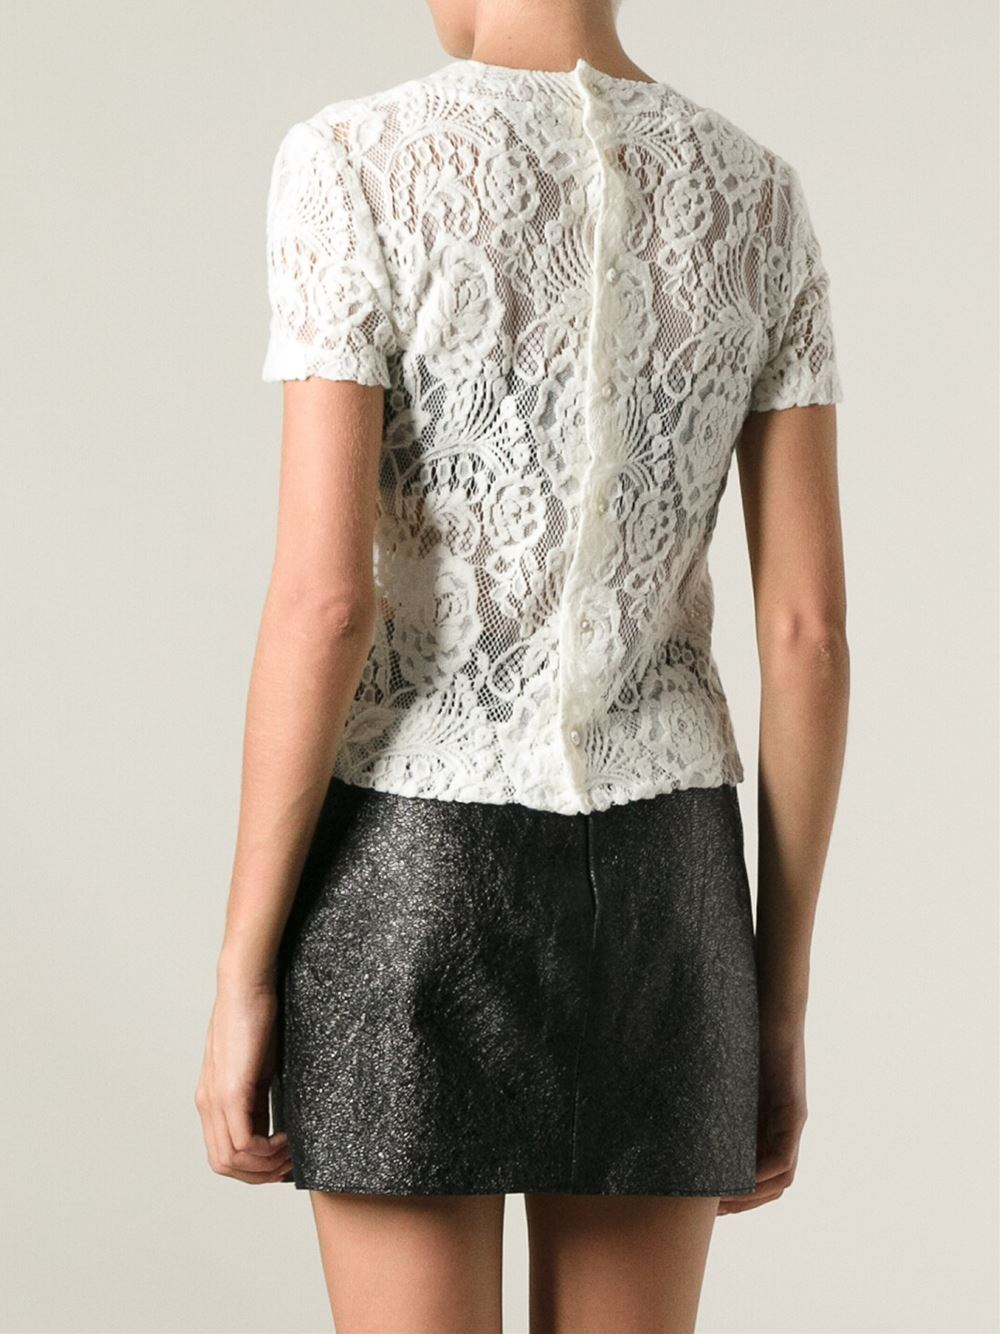 Lyst - Ermanno Scervino Short Sleeve Lace Blouse in White